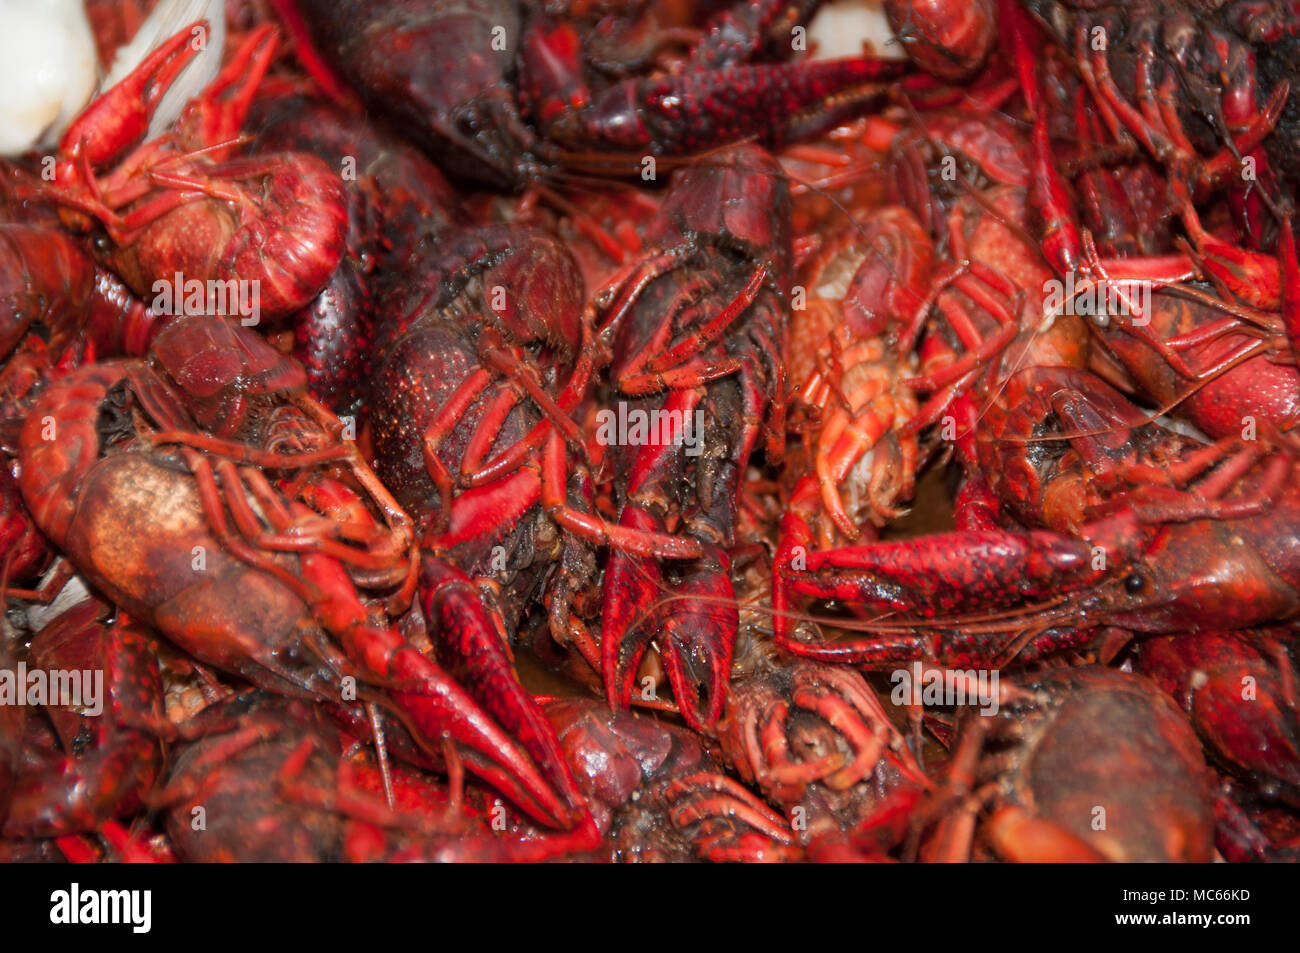 Bright Red pile of cooked Crawdads Stock Photo